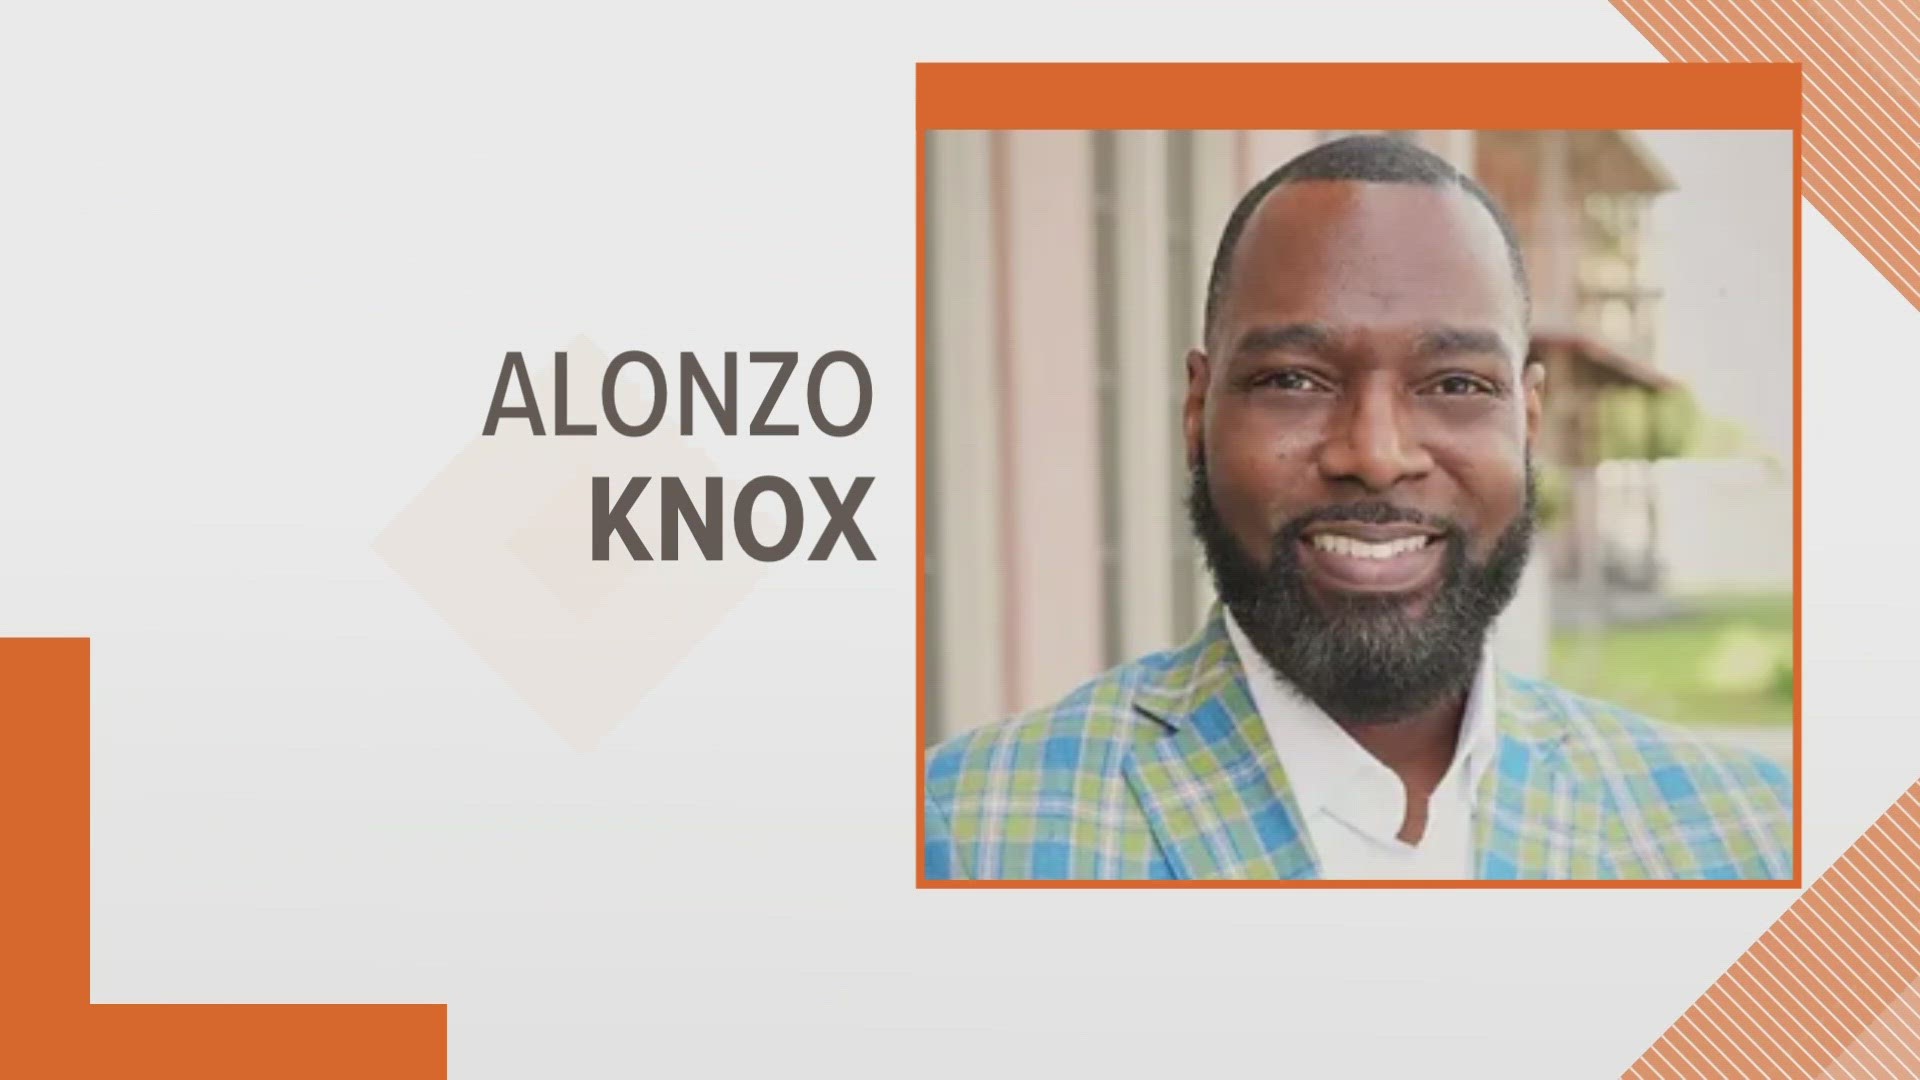 Alonzo Knox wins vacated 93rd House seat